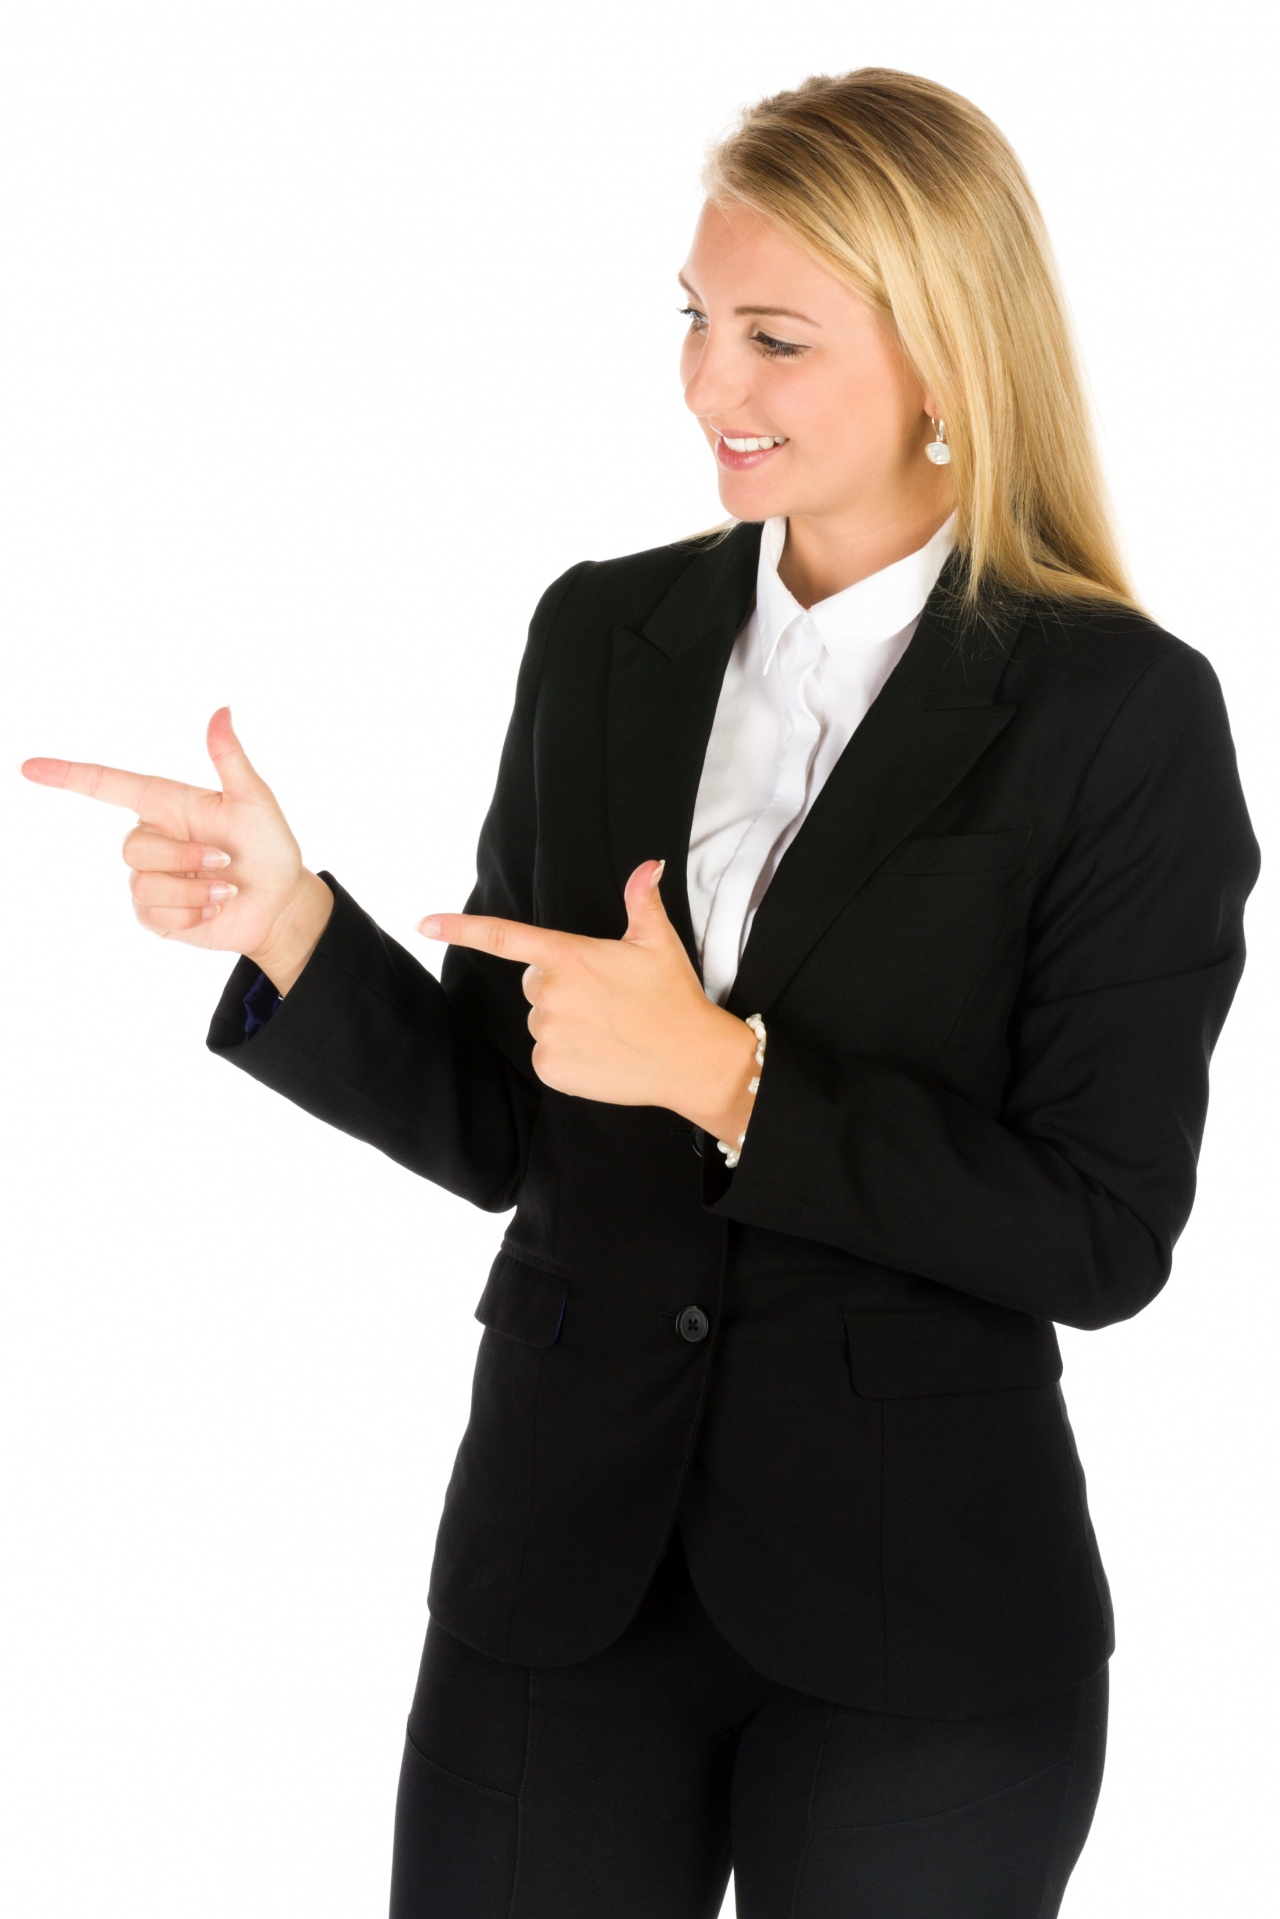 http://www.publicdomainpictures.net/pictures/190000/velka/business-woman-pointing-1470490502yld.jpg